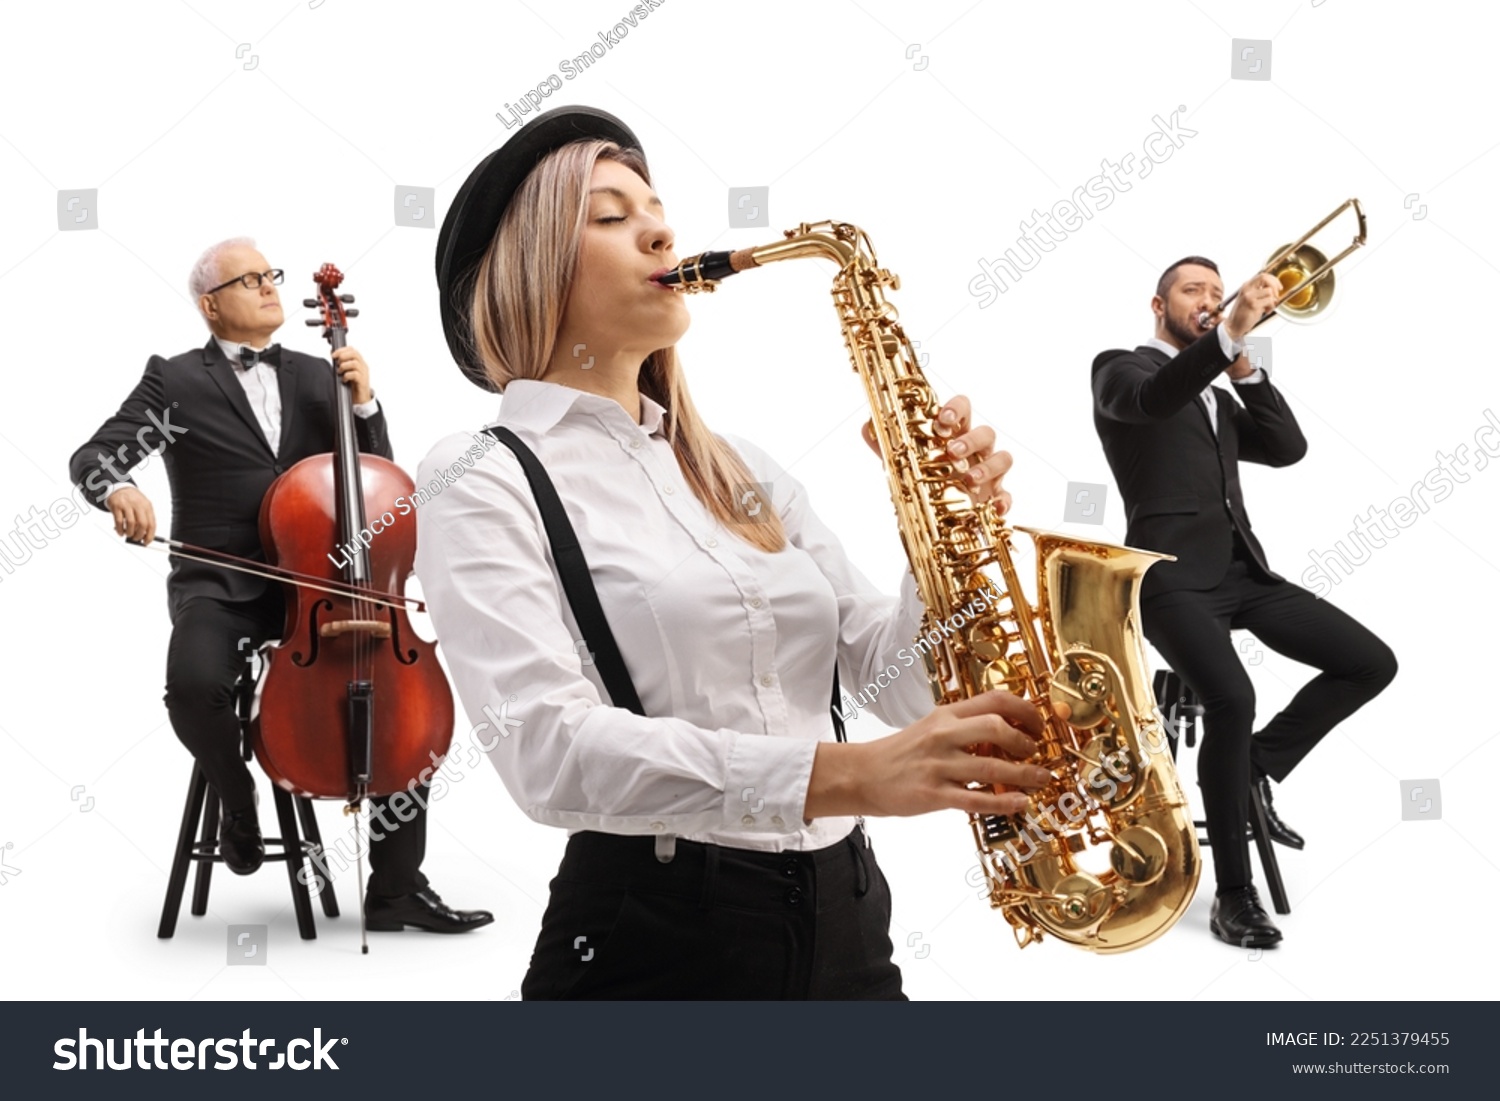 Woman playing a sax and two men in the back playing a trombone and a cello isolated on white background #2251379455